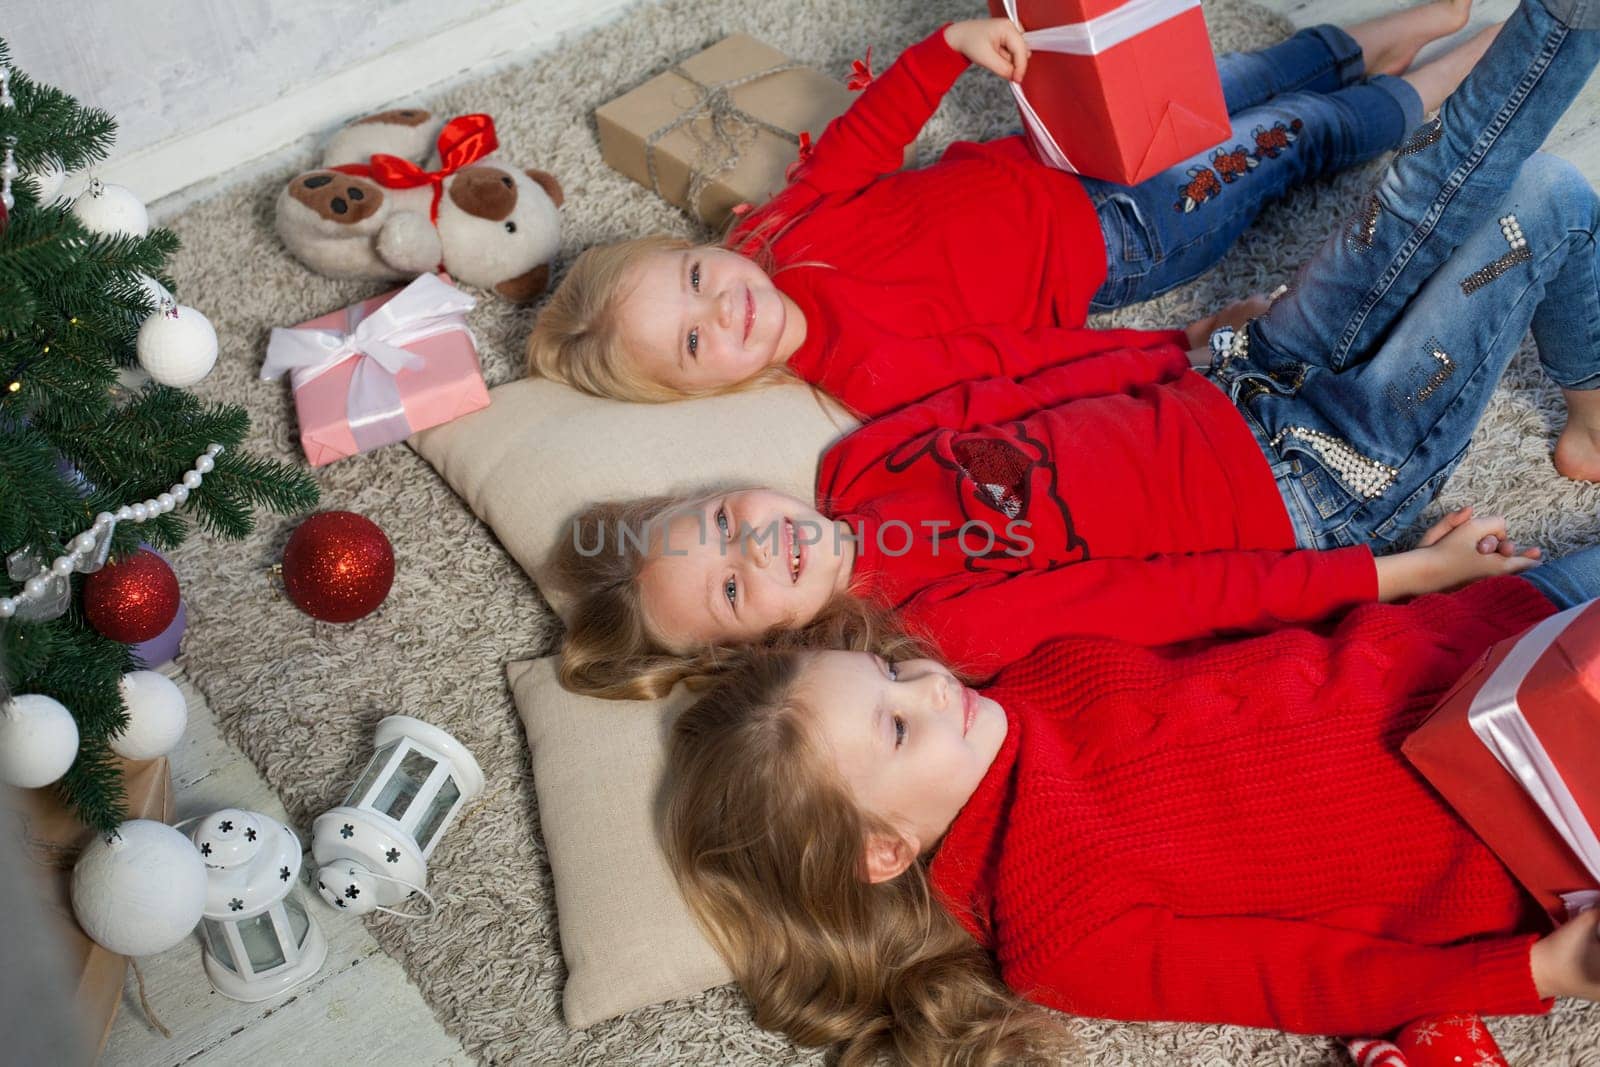 Three little girls open gifts at the Christmas tree new year winter by Simakov